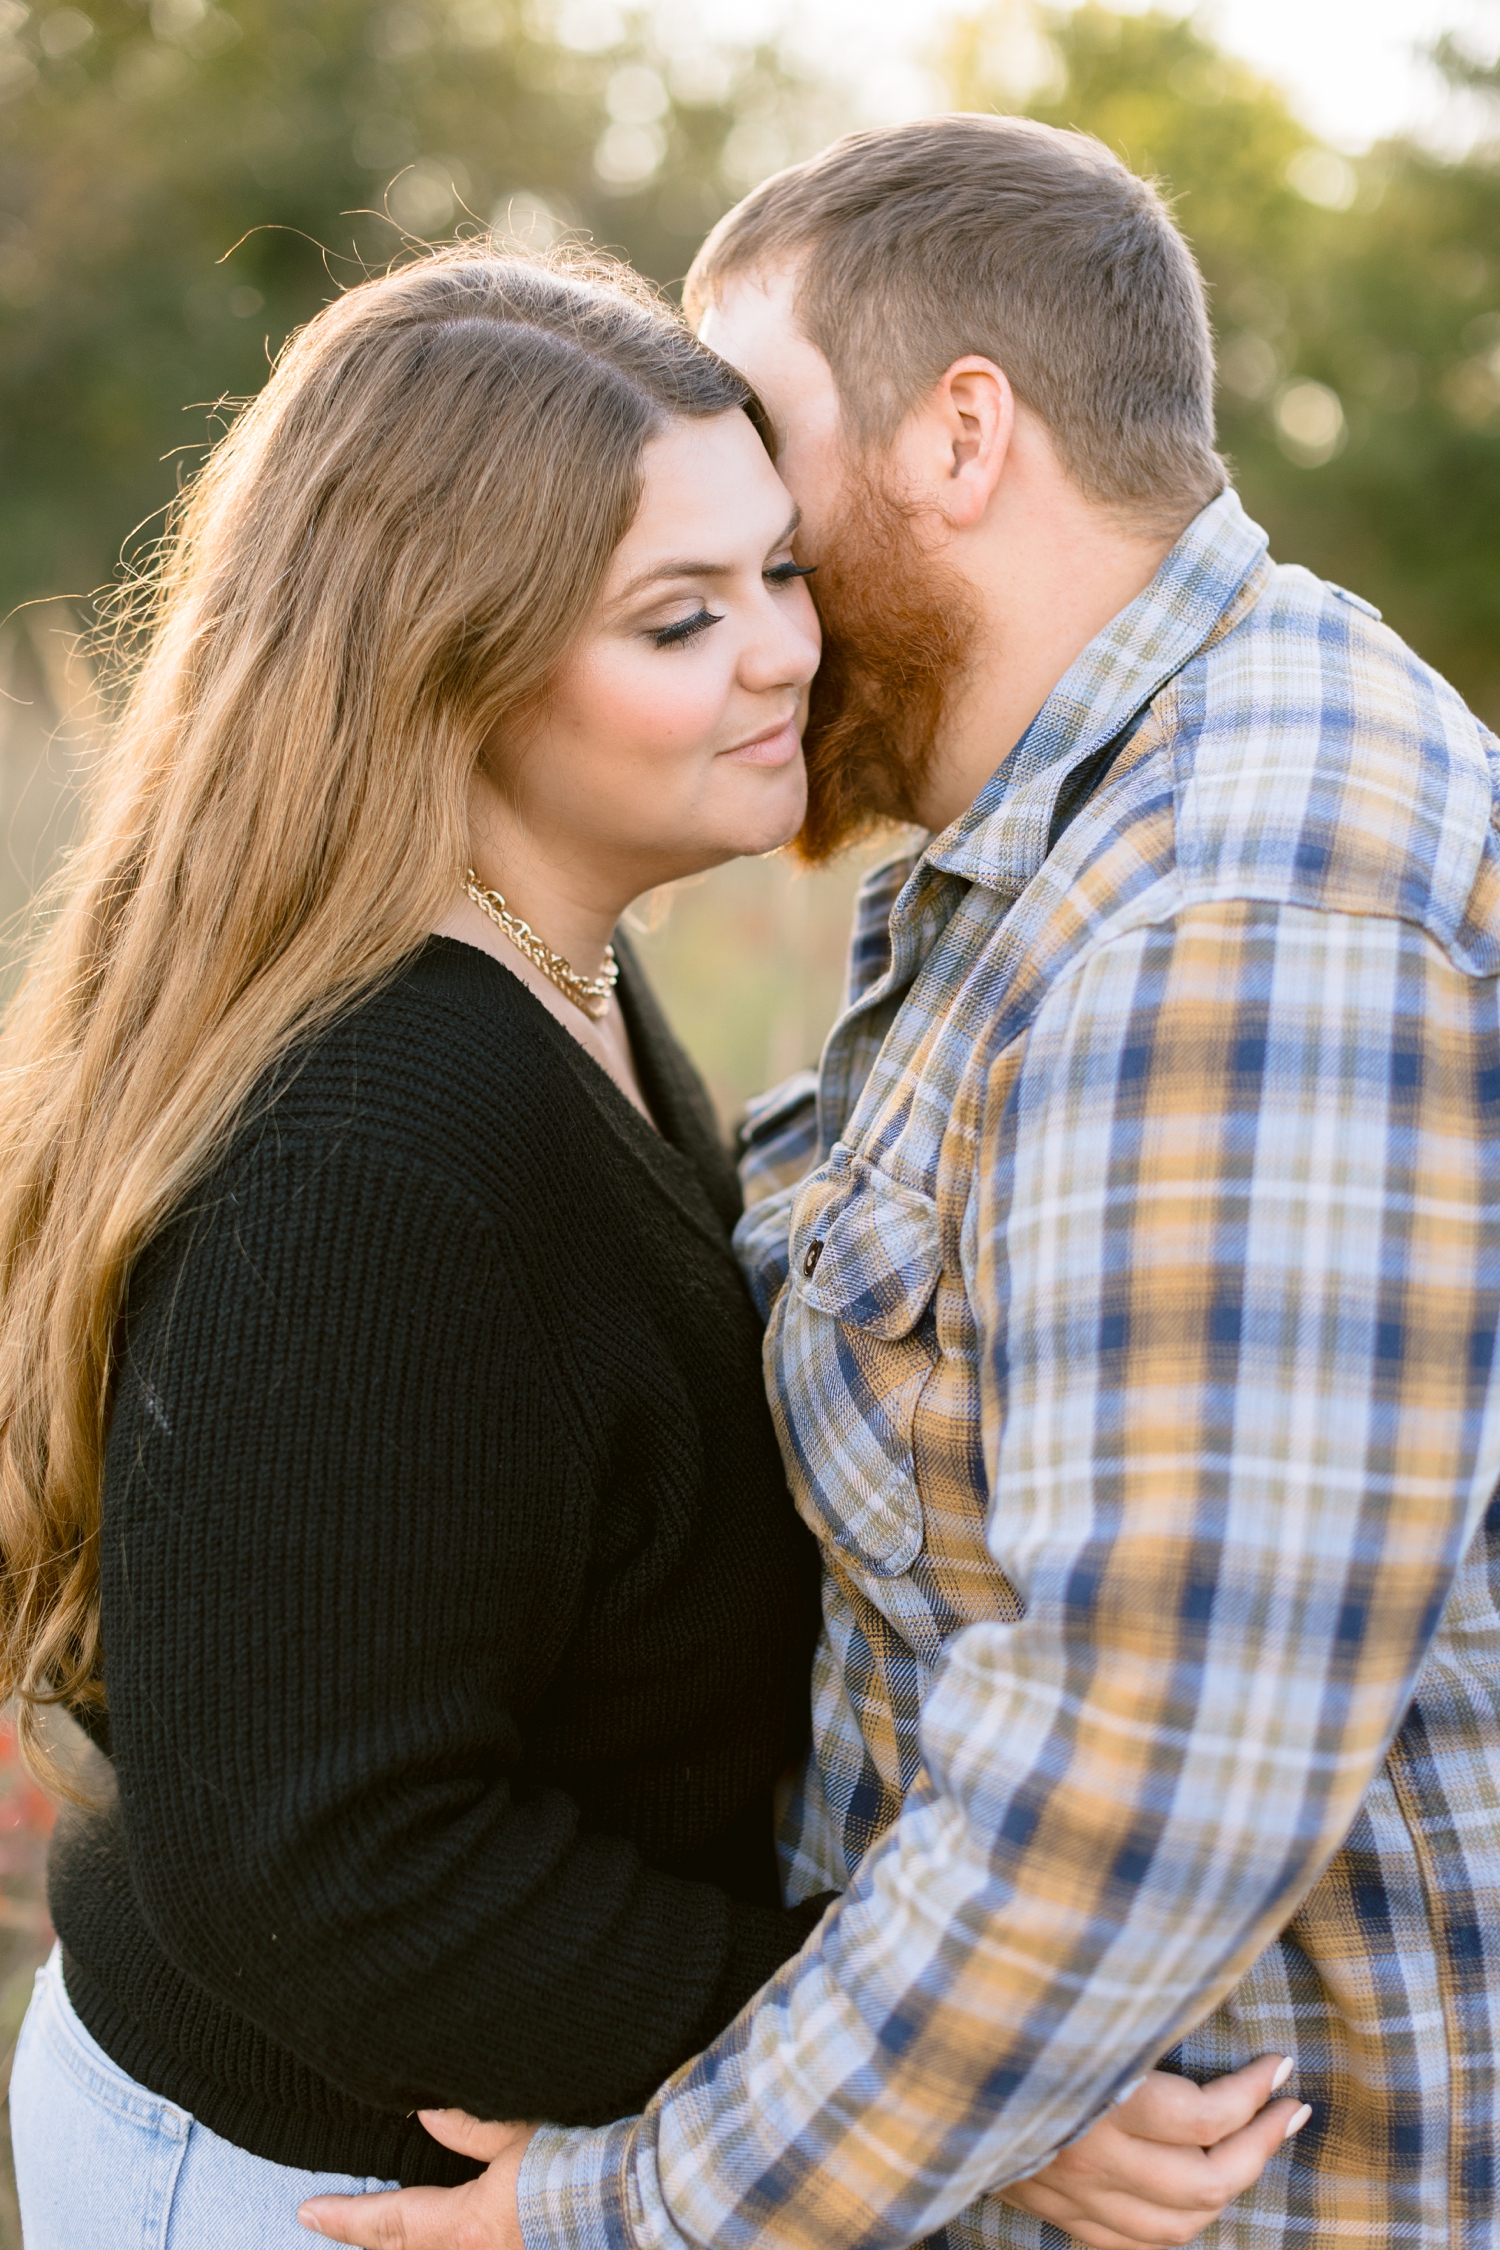 Trent whispers in the ear of his bride-to-be surrounded by fall foliage at Sheldon Park in Humboldt, IA | CB Studio